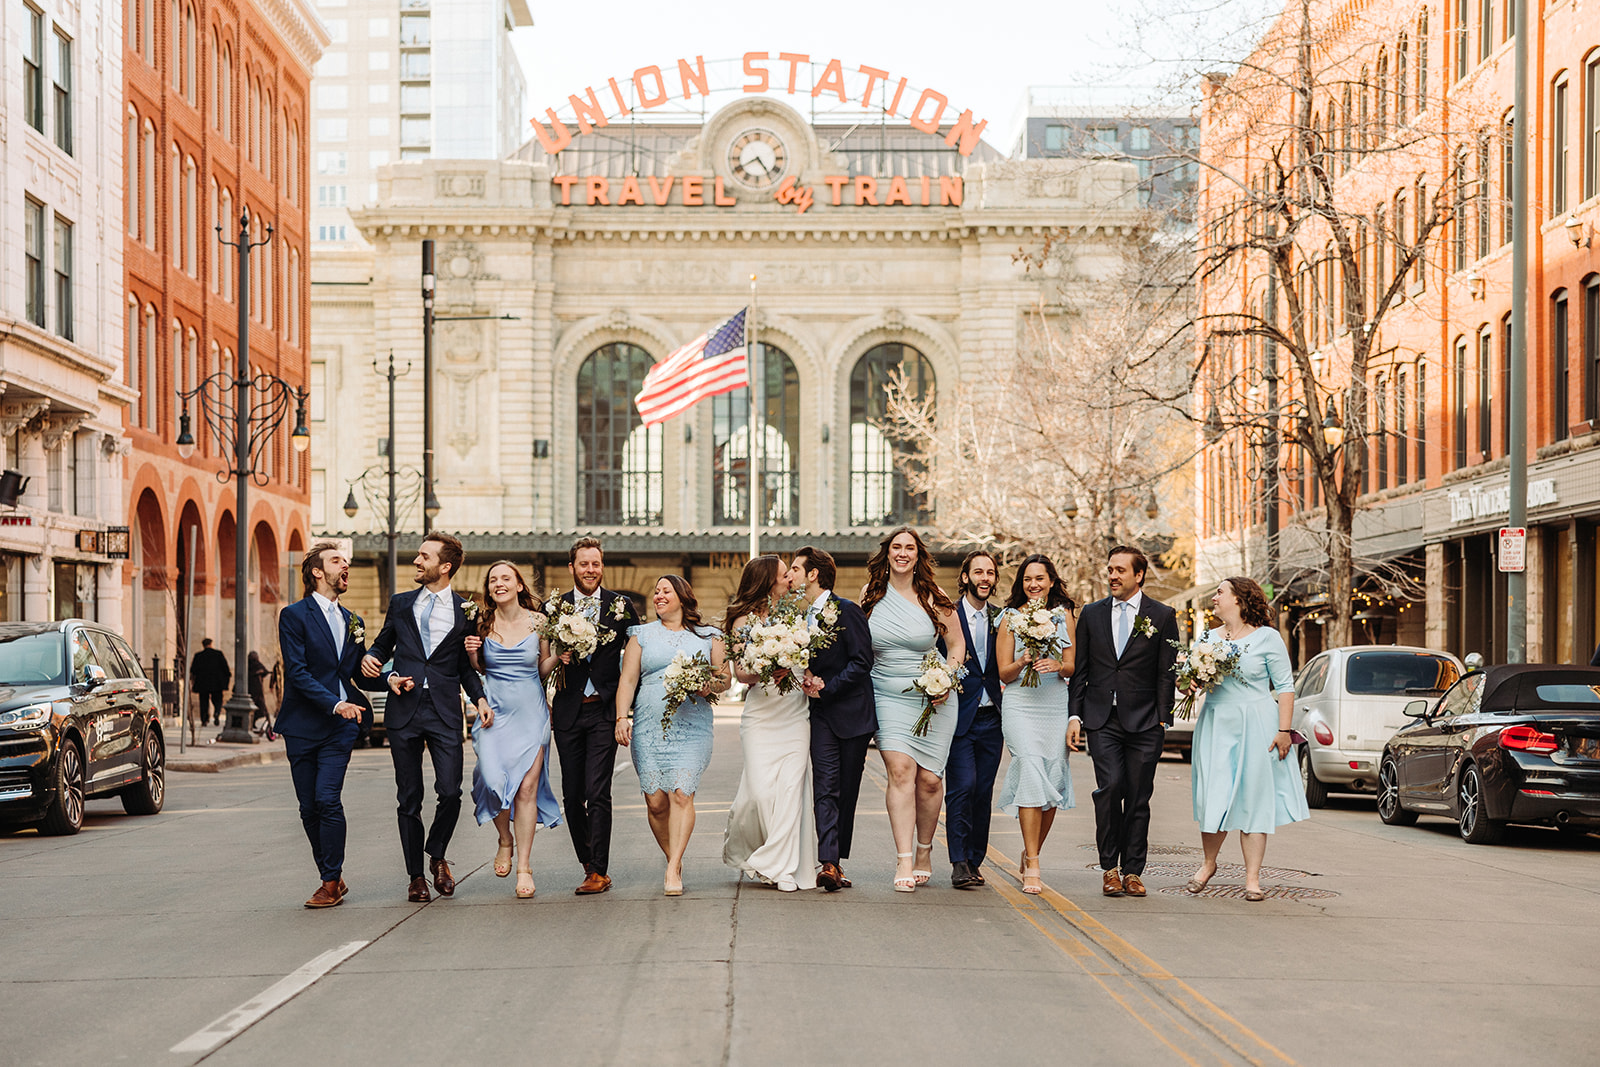 wedding party walking in front of Union station